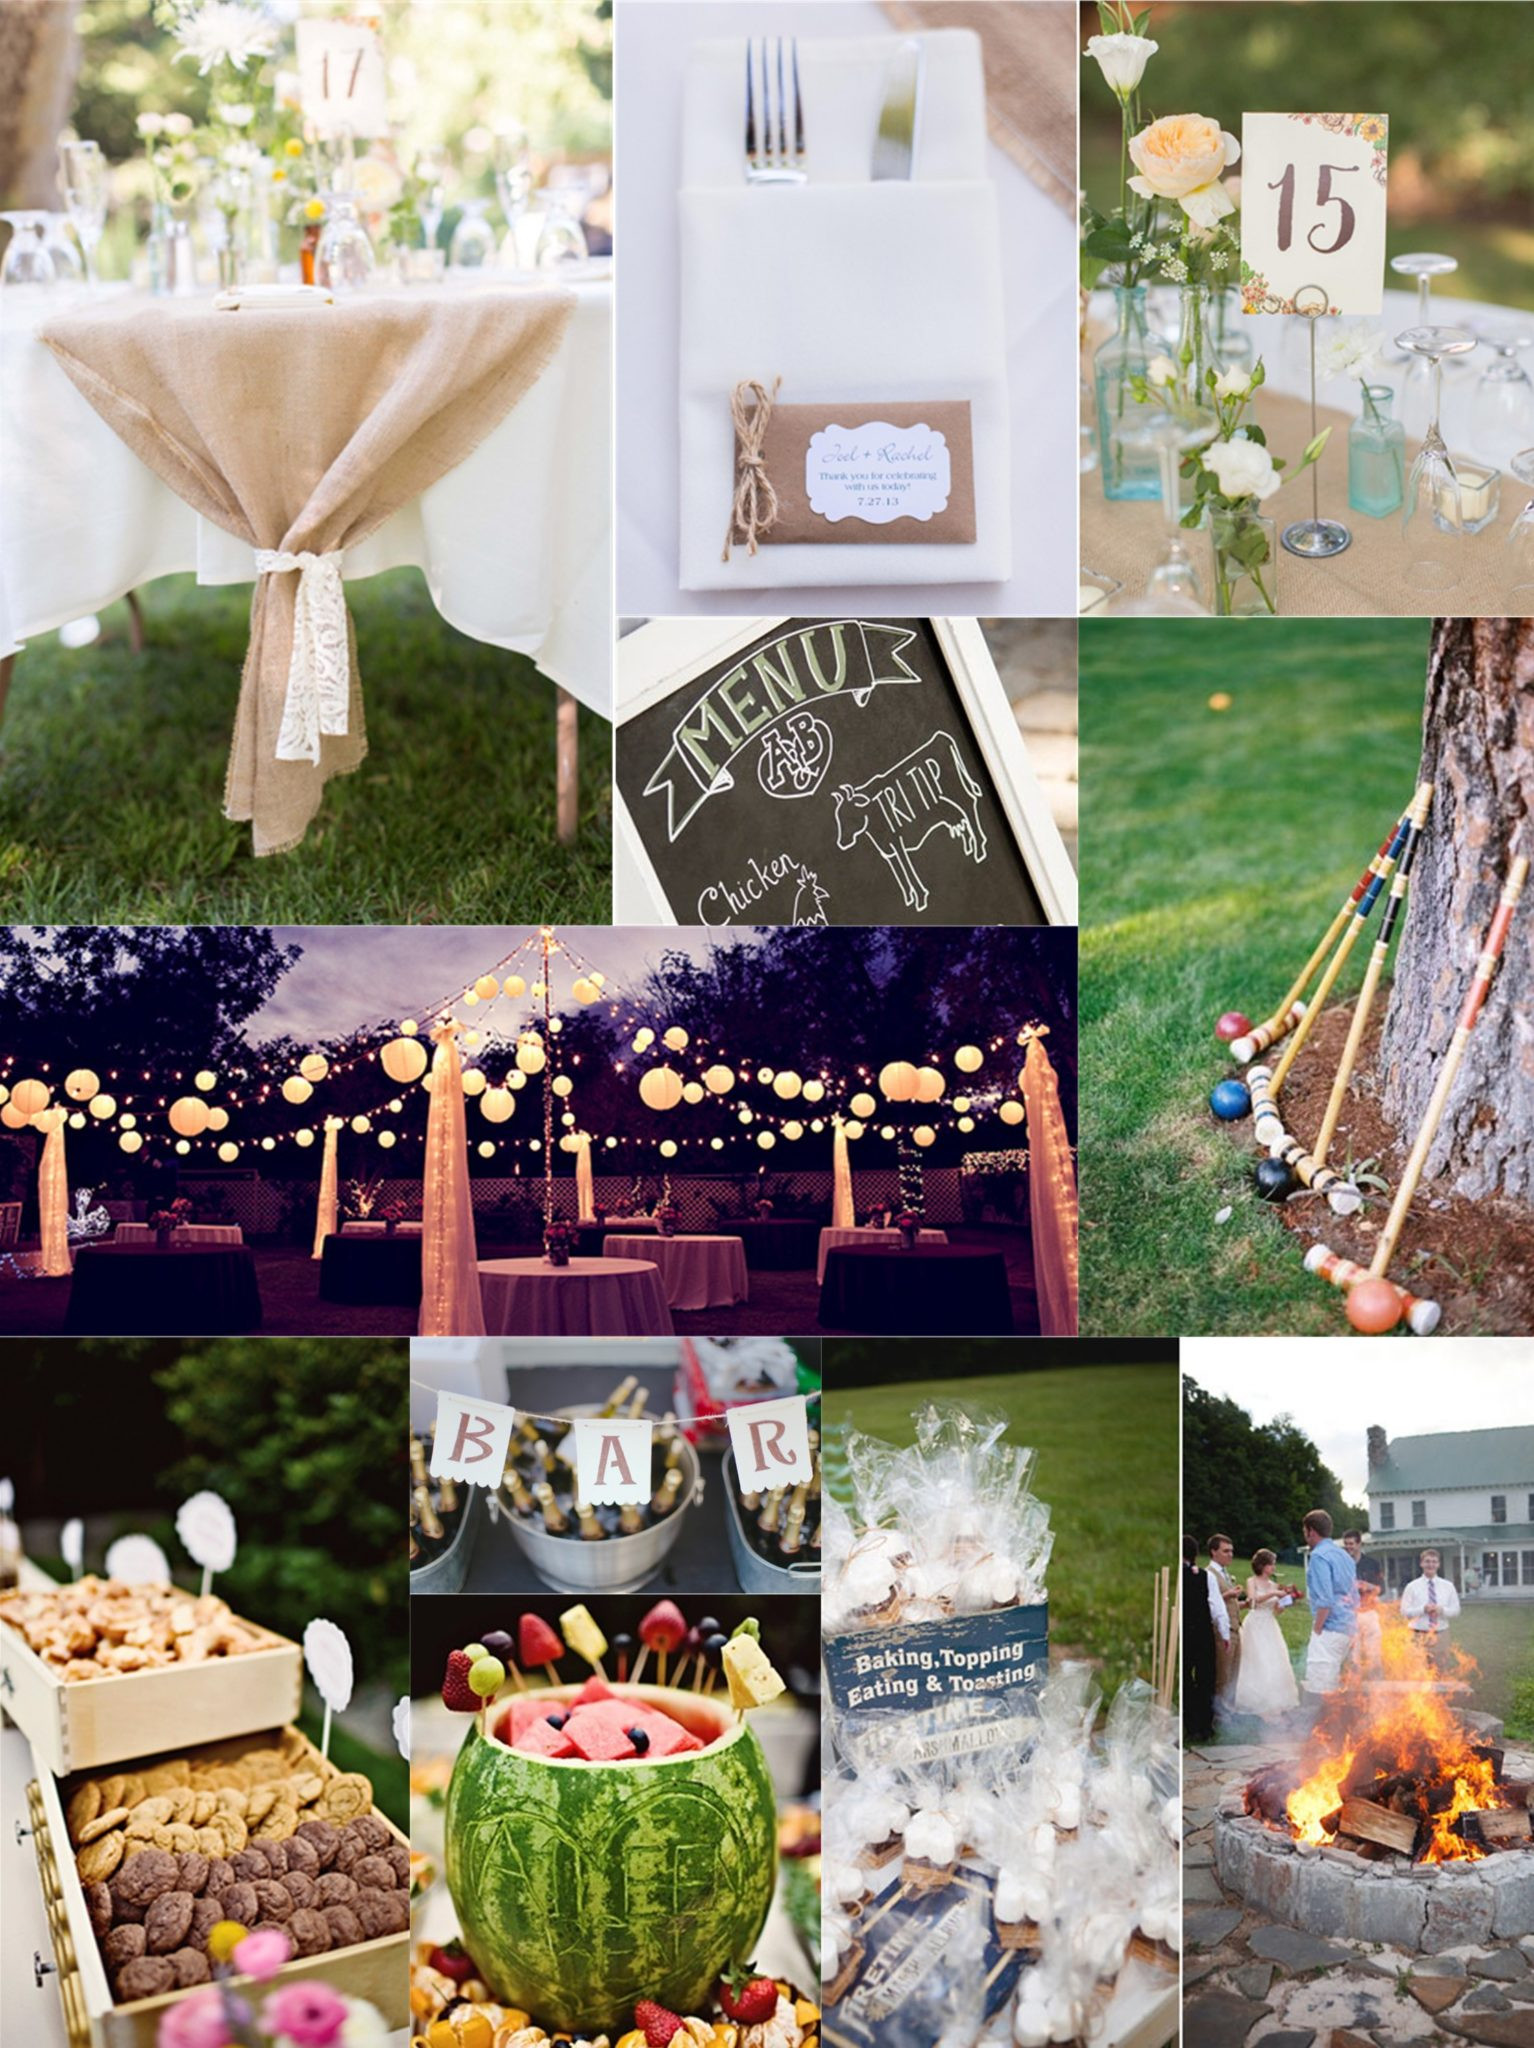 Engagement Party Decorating Ideas On A Budget
 Essential Guide to a Backyard Wedding on a Bud